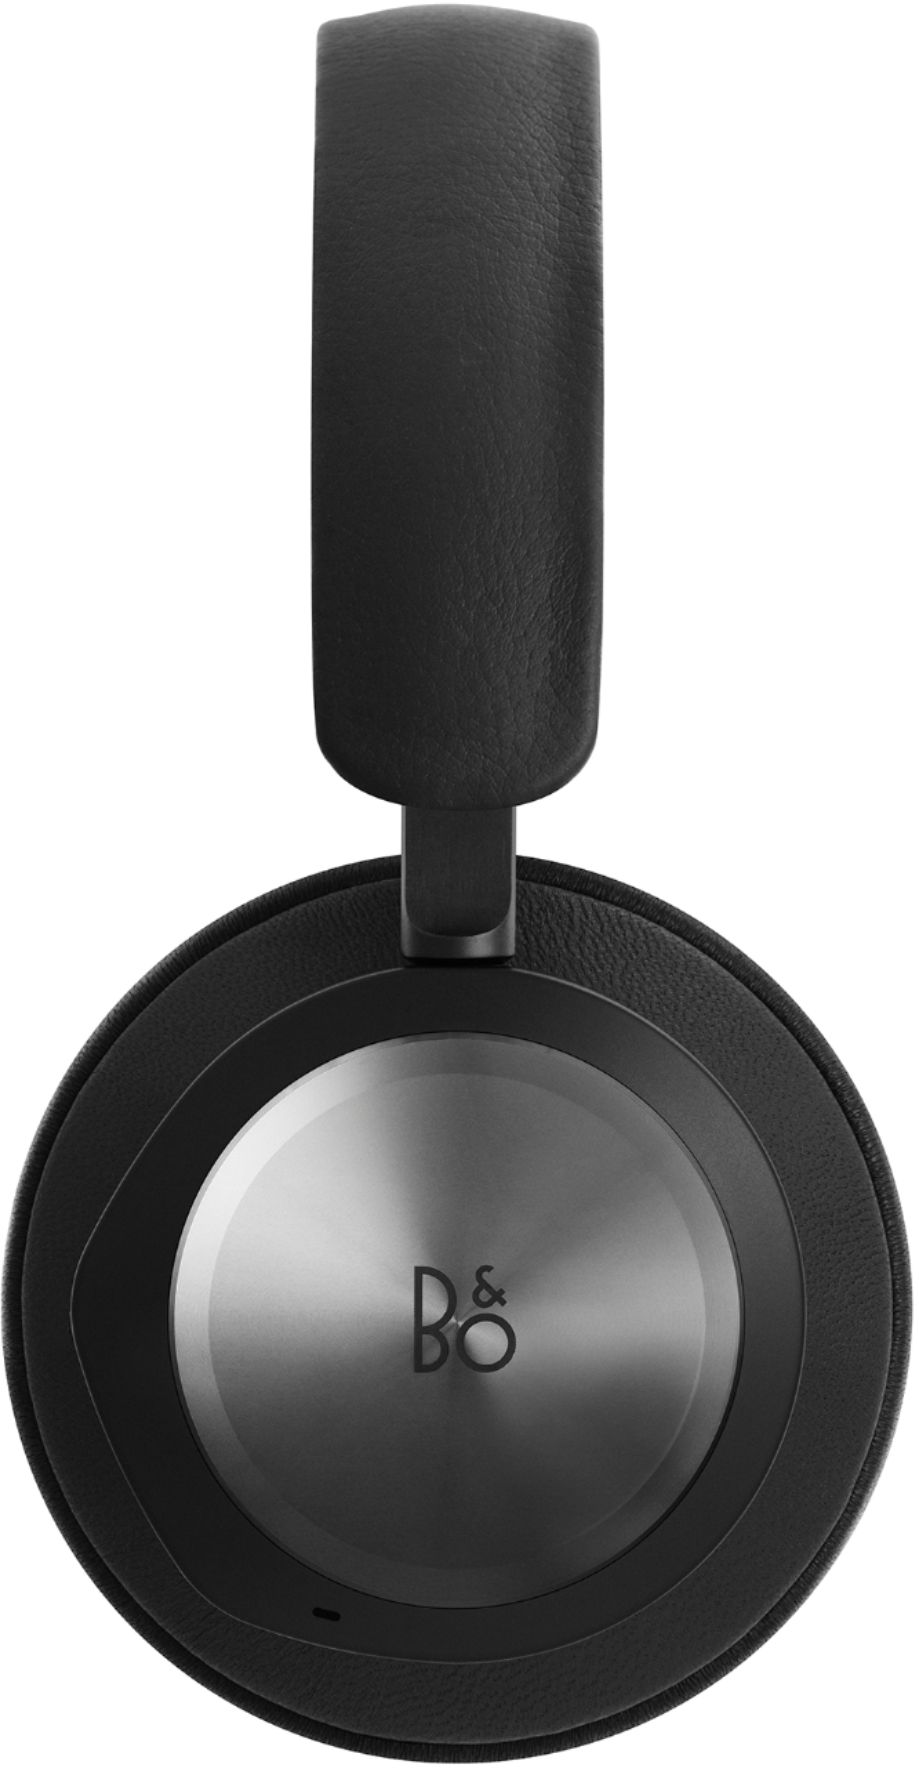 Bang & Olufsen - Beoplay Portal Wireless Noise Cancelling Over-the-Ear Headphones - Black Anthracite